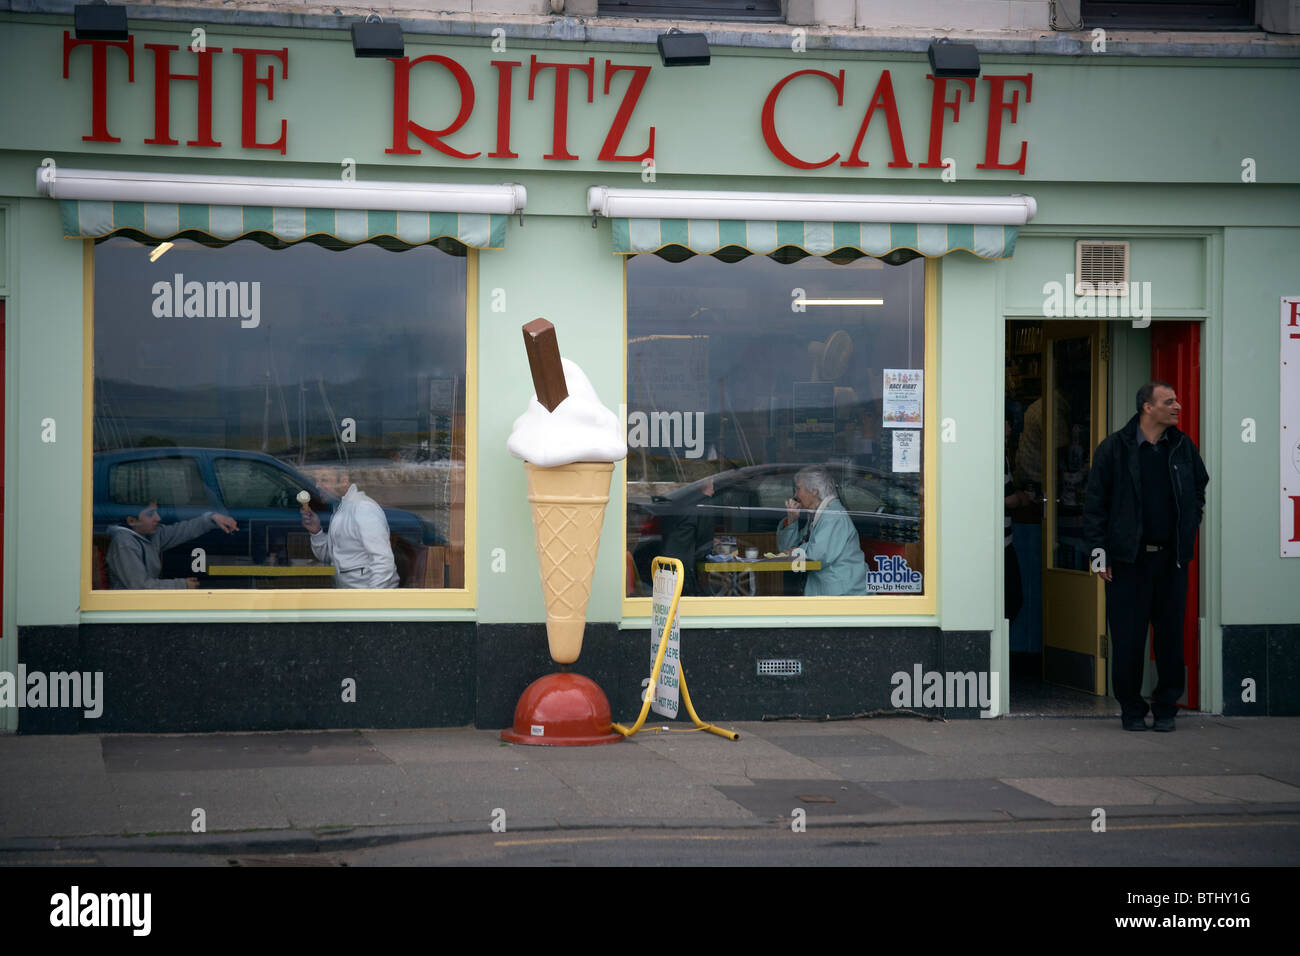 The Ritz Cafe on the Seafront at Millport on the Isle of Cumbrae, off the coast of Largs Ayrshire, Scoltland Stock Photo